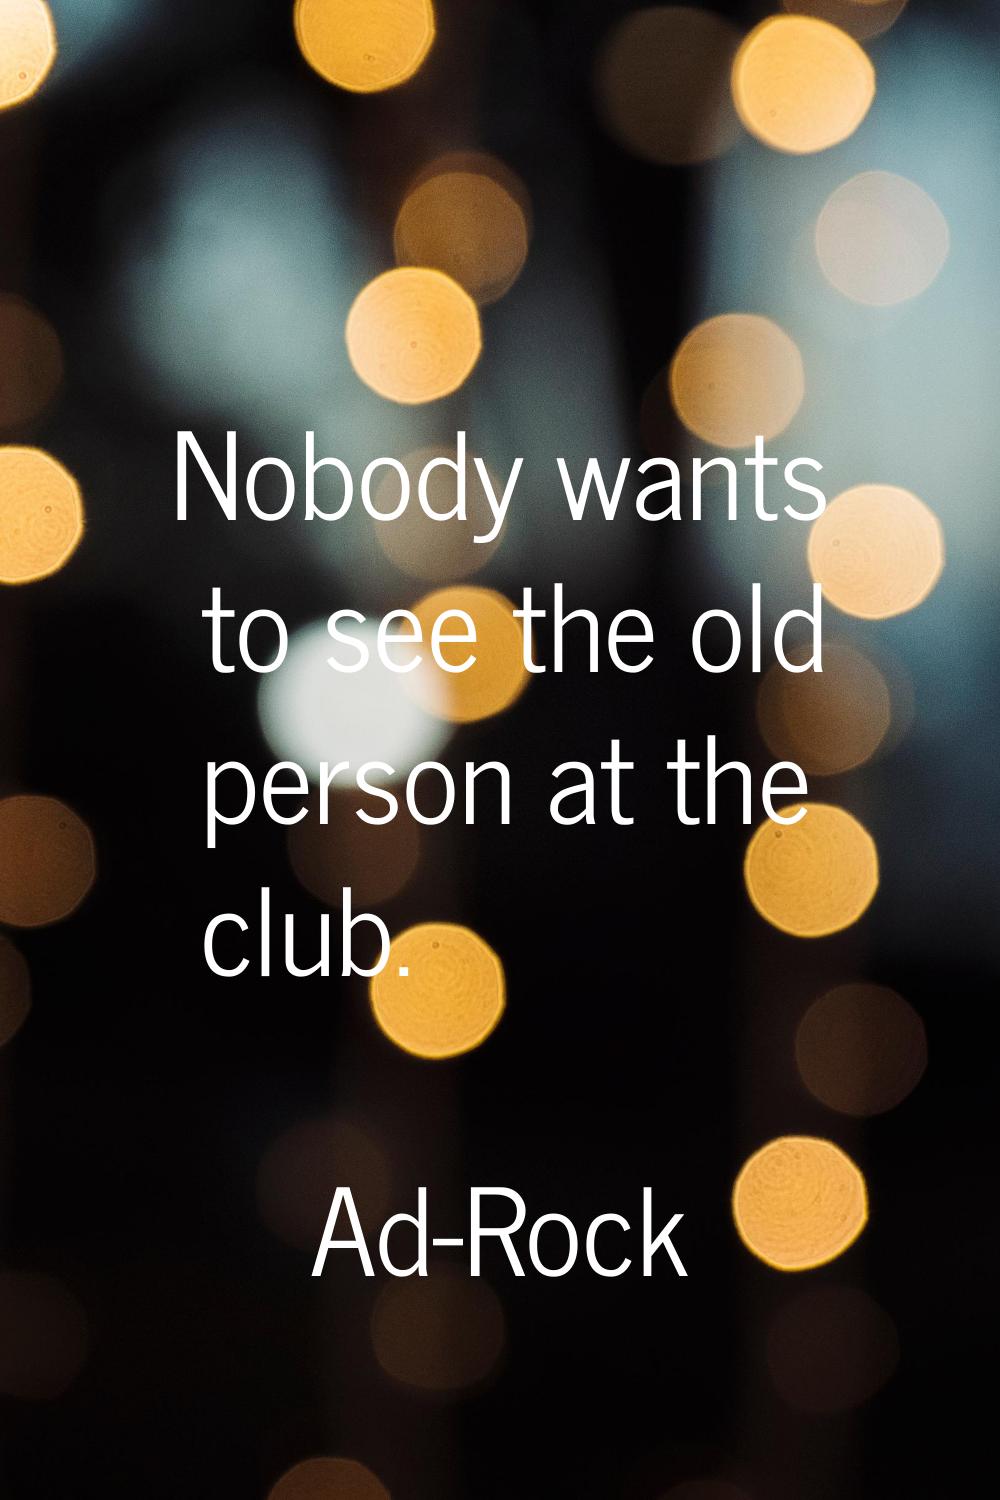 Nobody wants to see the old person at the club.